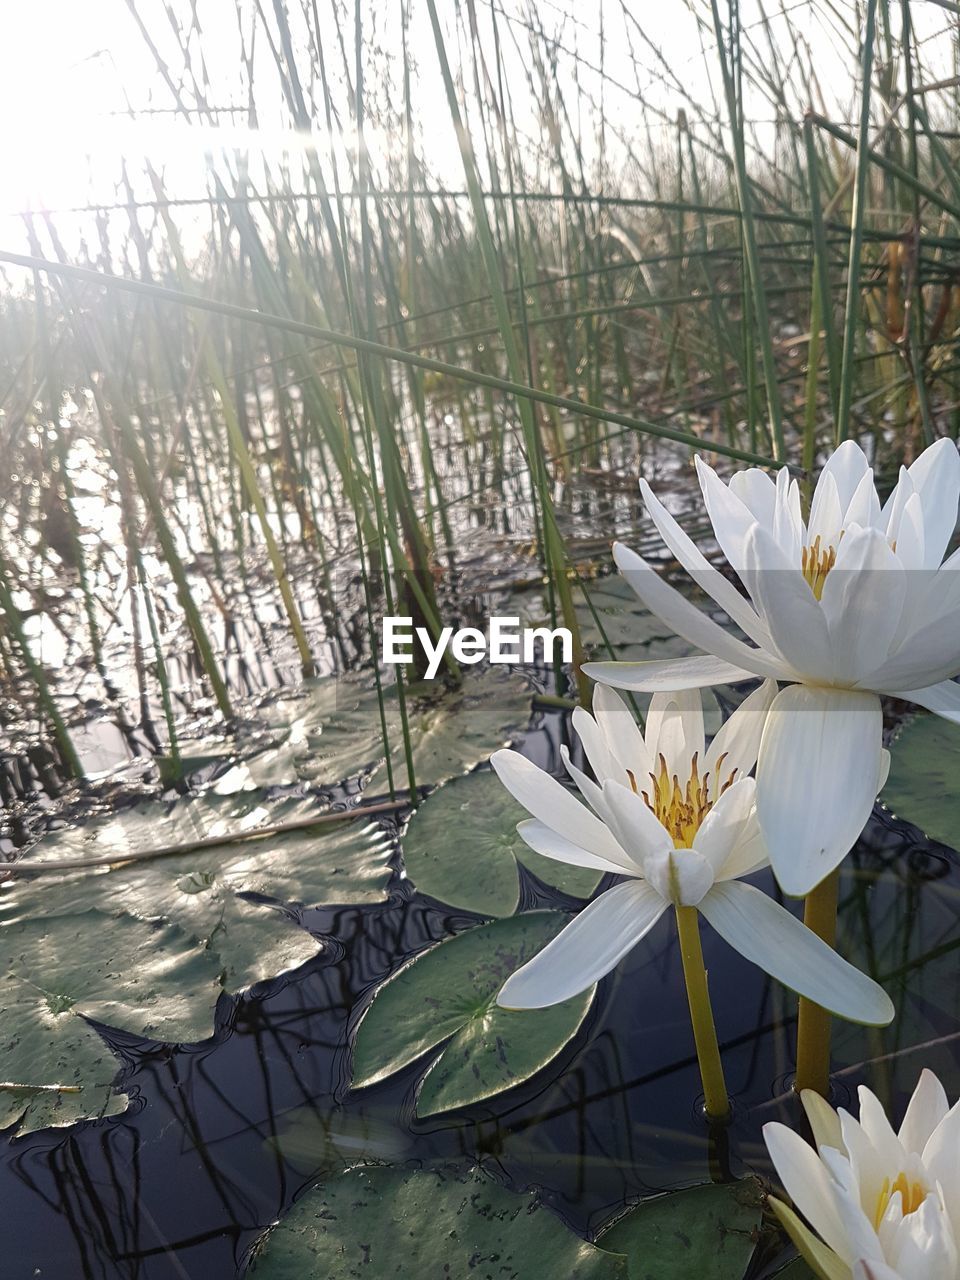 CLOSE-UP OF WATER LILIES IN LAKE